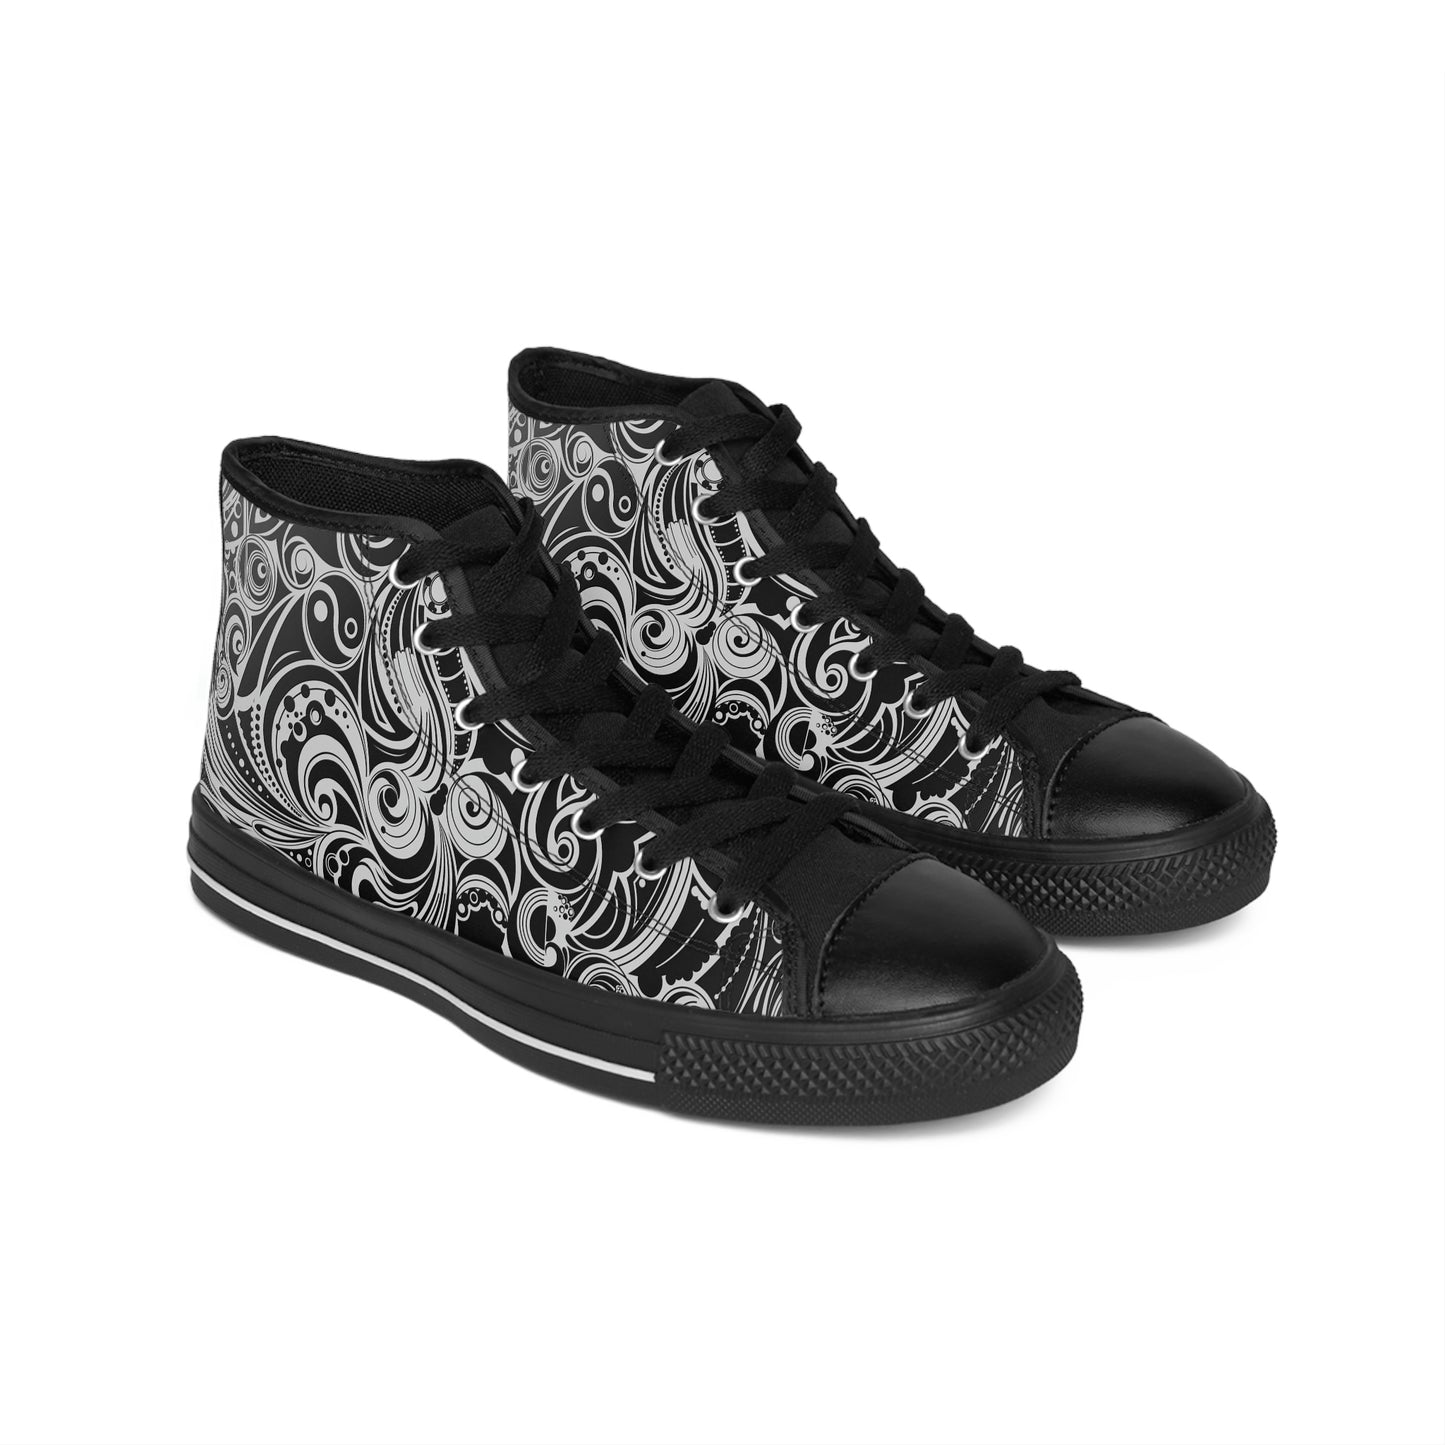 Men's Twisted Souls  High-top Sneakers